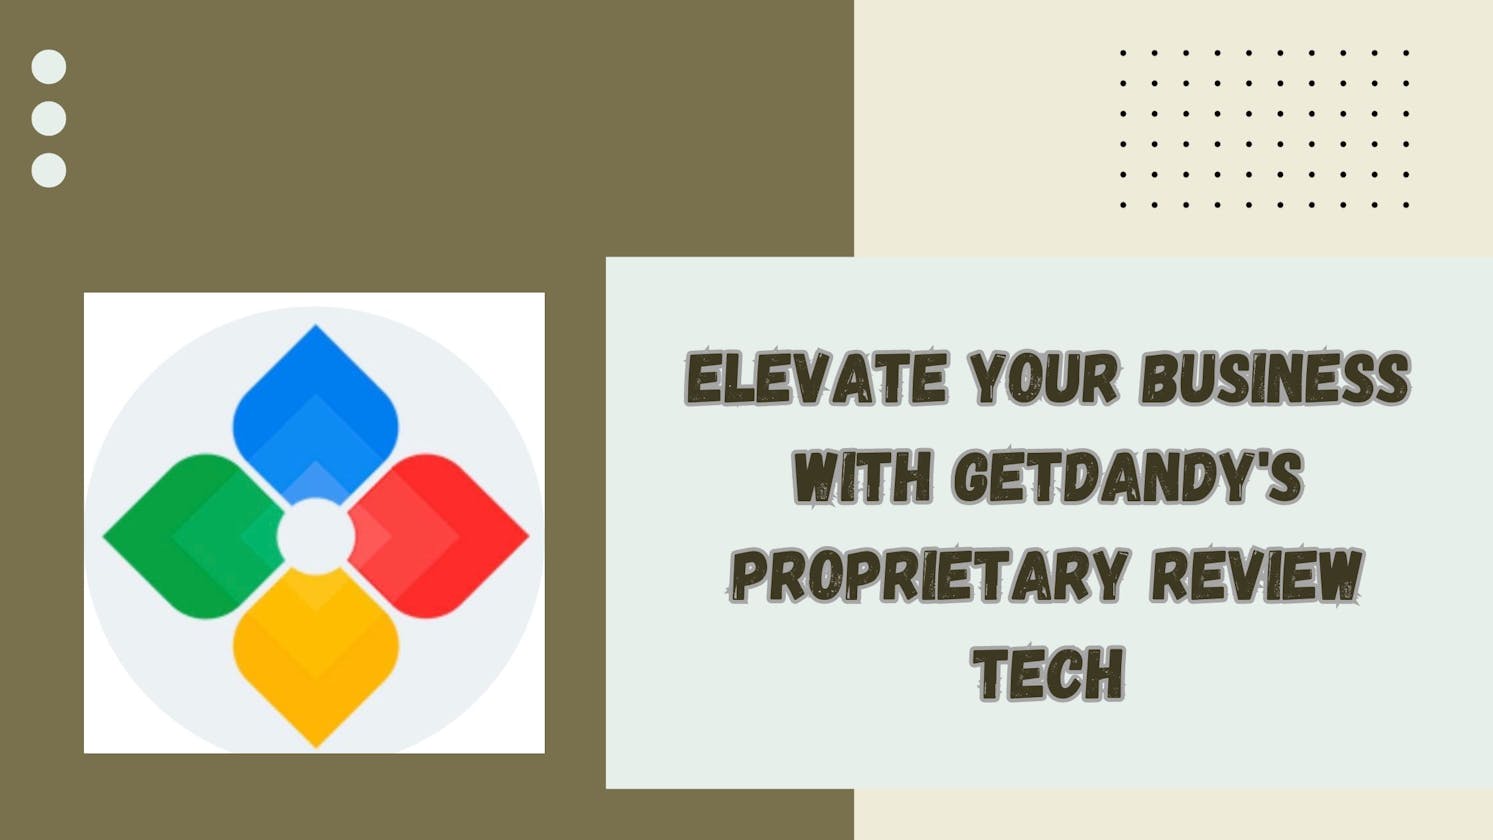 Elevate Your Business with Getdandy's Proprietary Review Tech